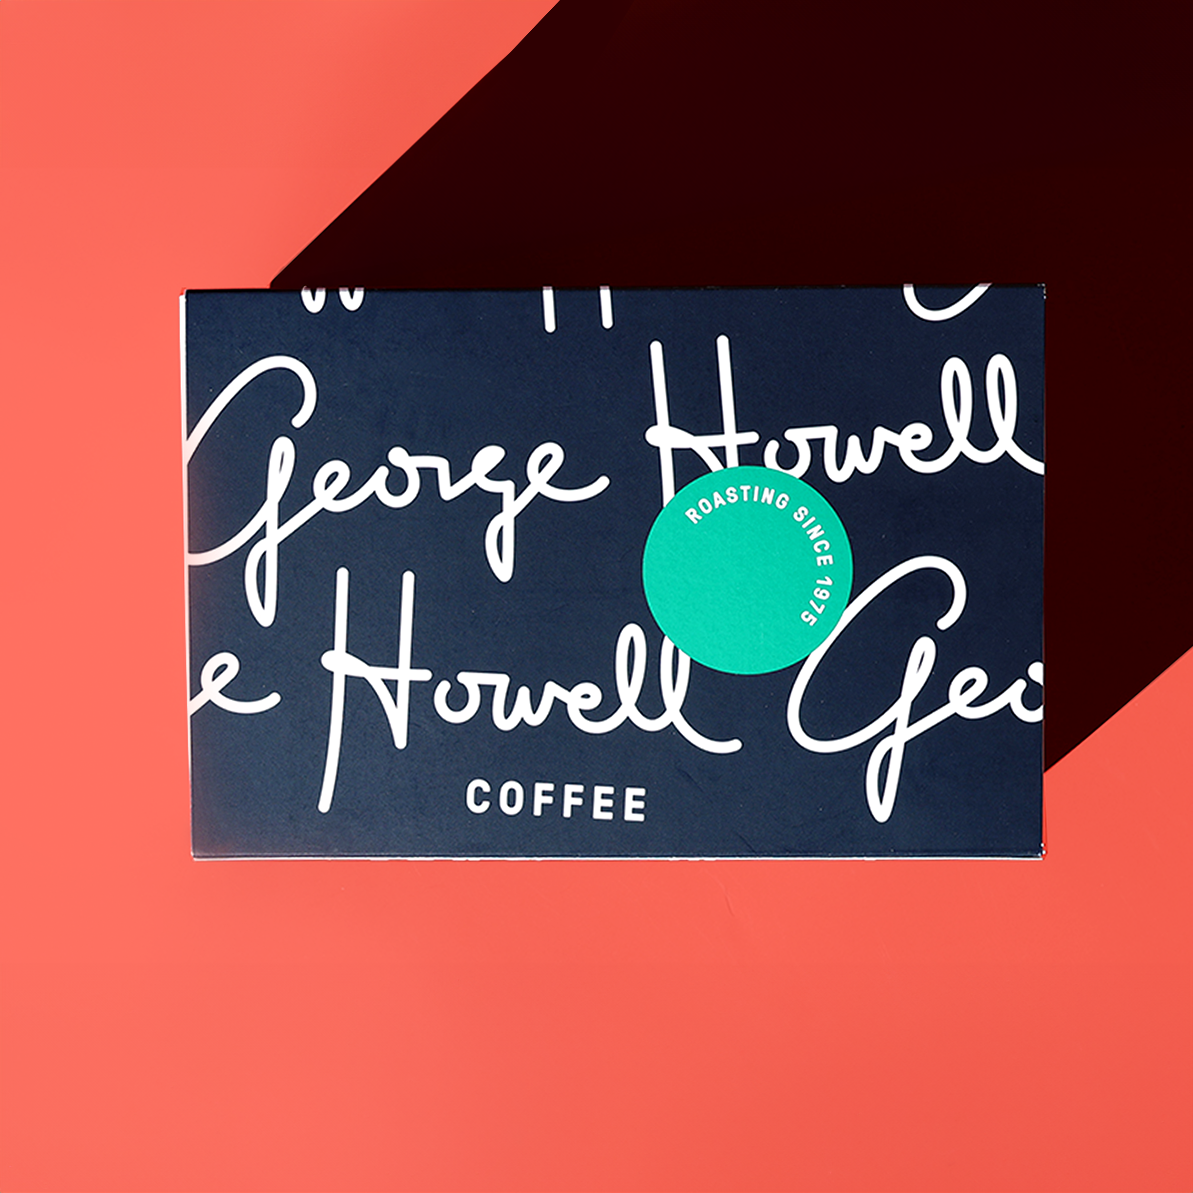 Fellow Carter Cold Tumbler – George Howell Coffee